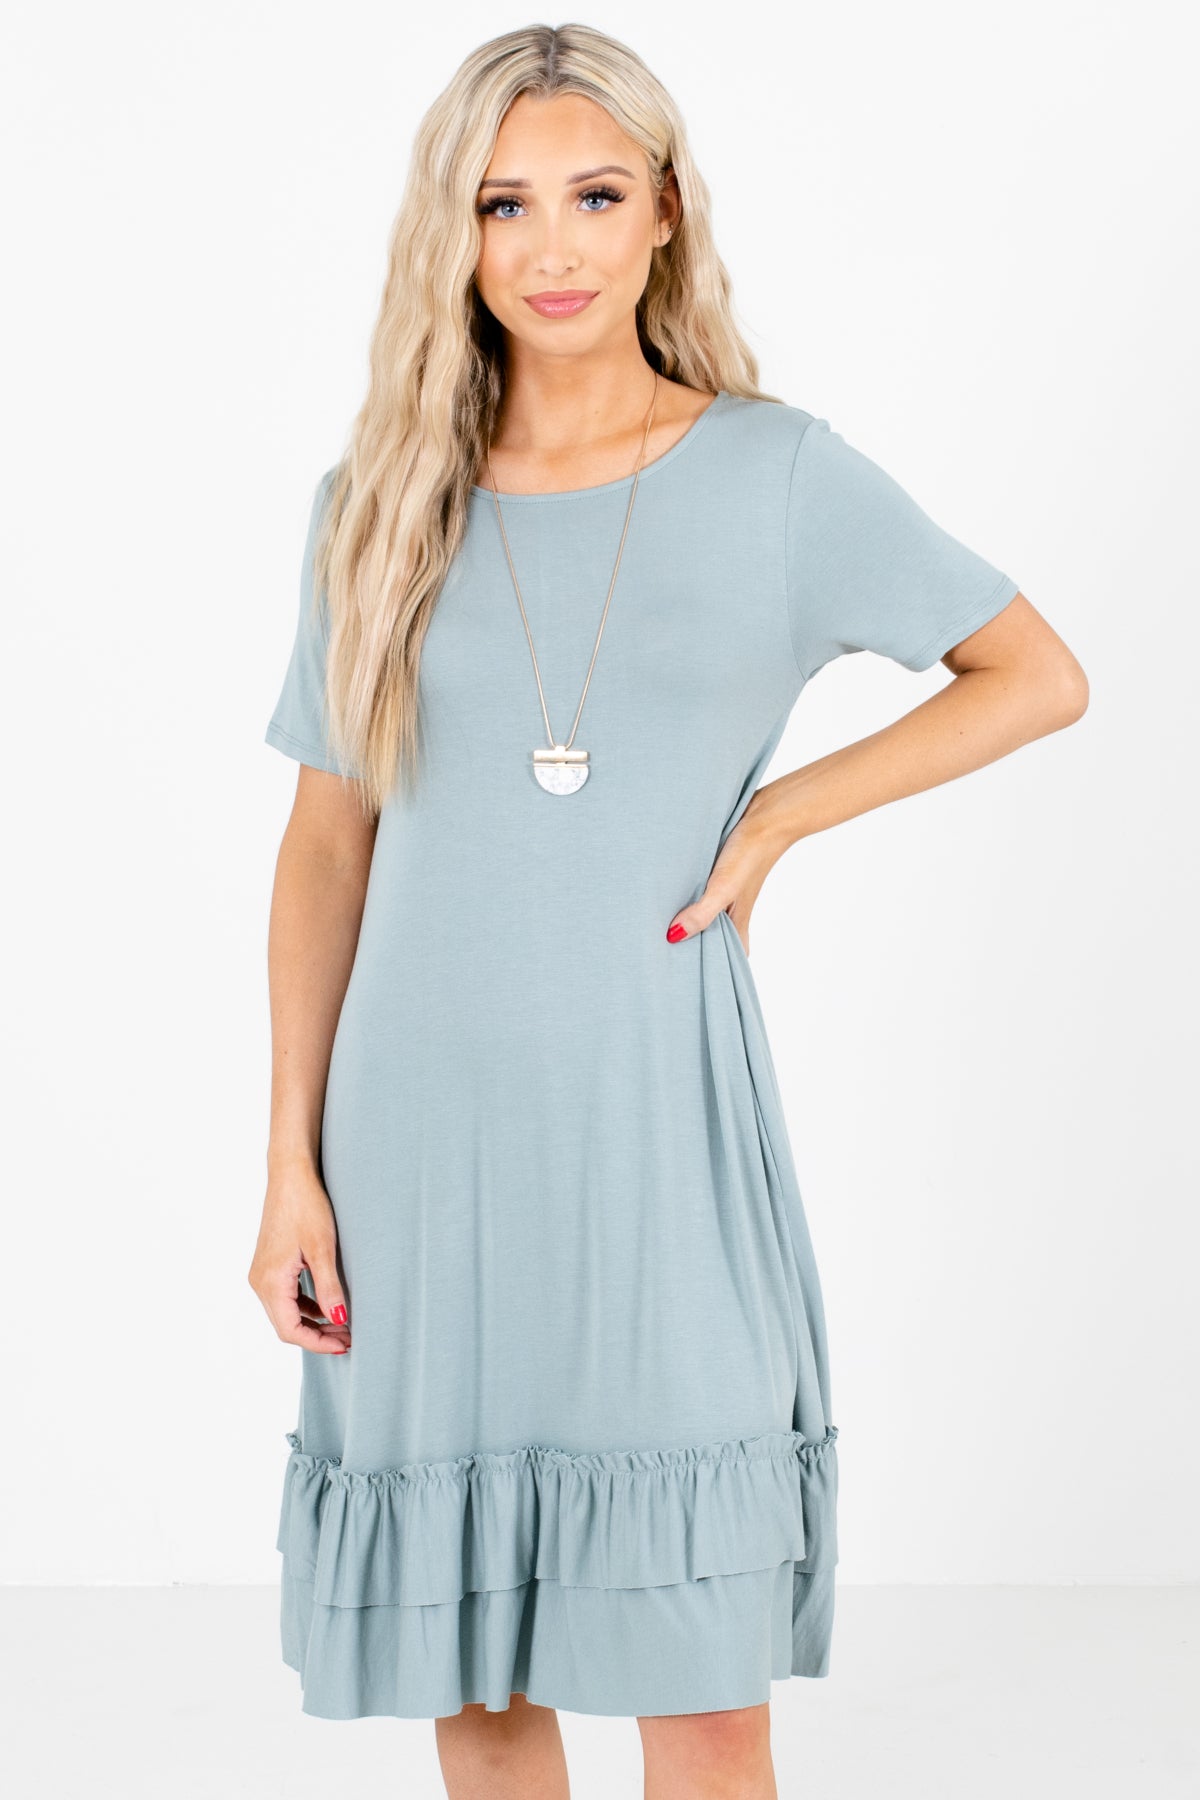 Green Affordable Online Boutique Clothing for Women